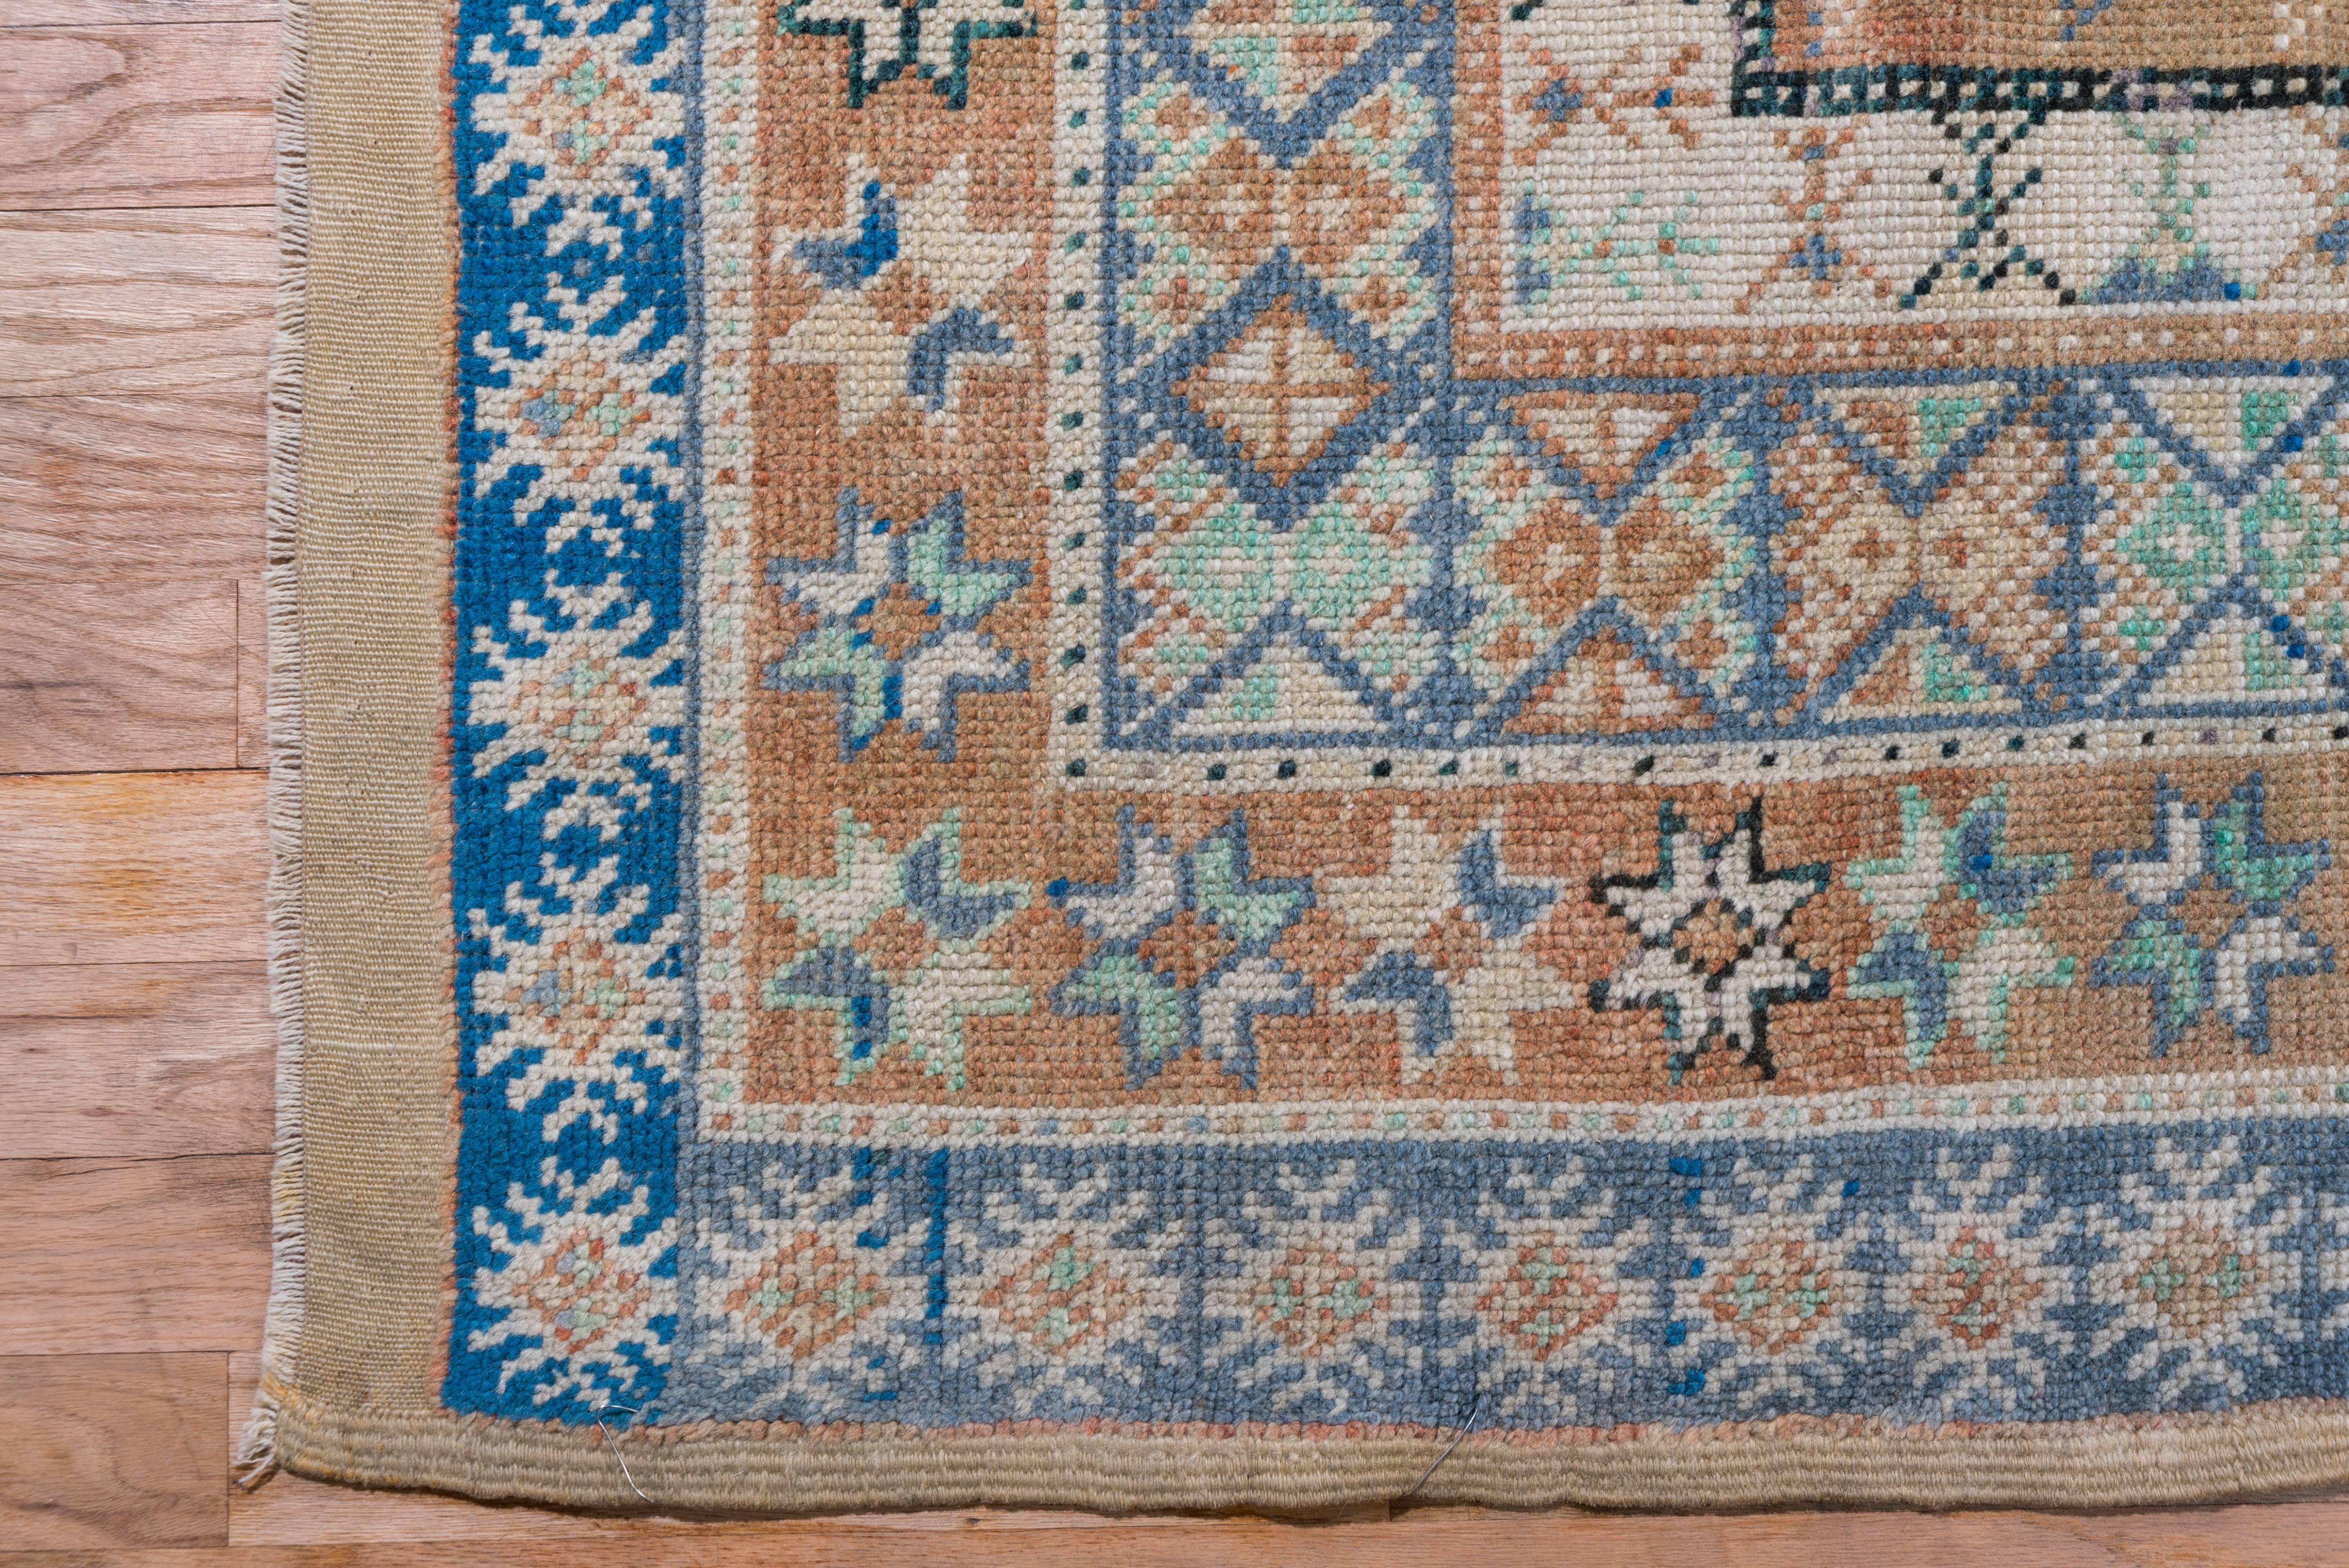 This very unusual 1920s Moroccan rug is not what is entirely different than the typical bold and naively drawn Moroccan rug. It has three large-scale boxed compartments in the center with bold balanced colors perfectly offset by the delicately